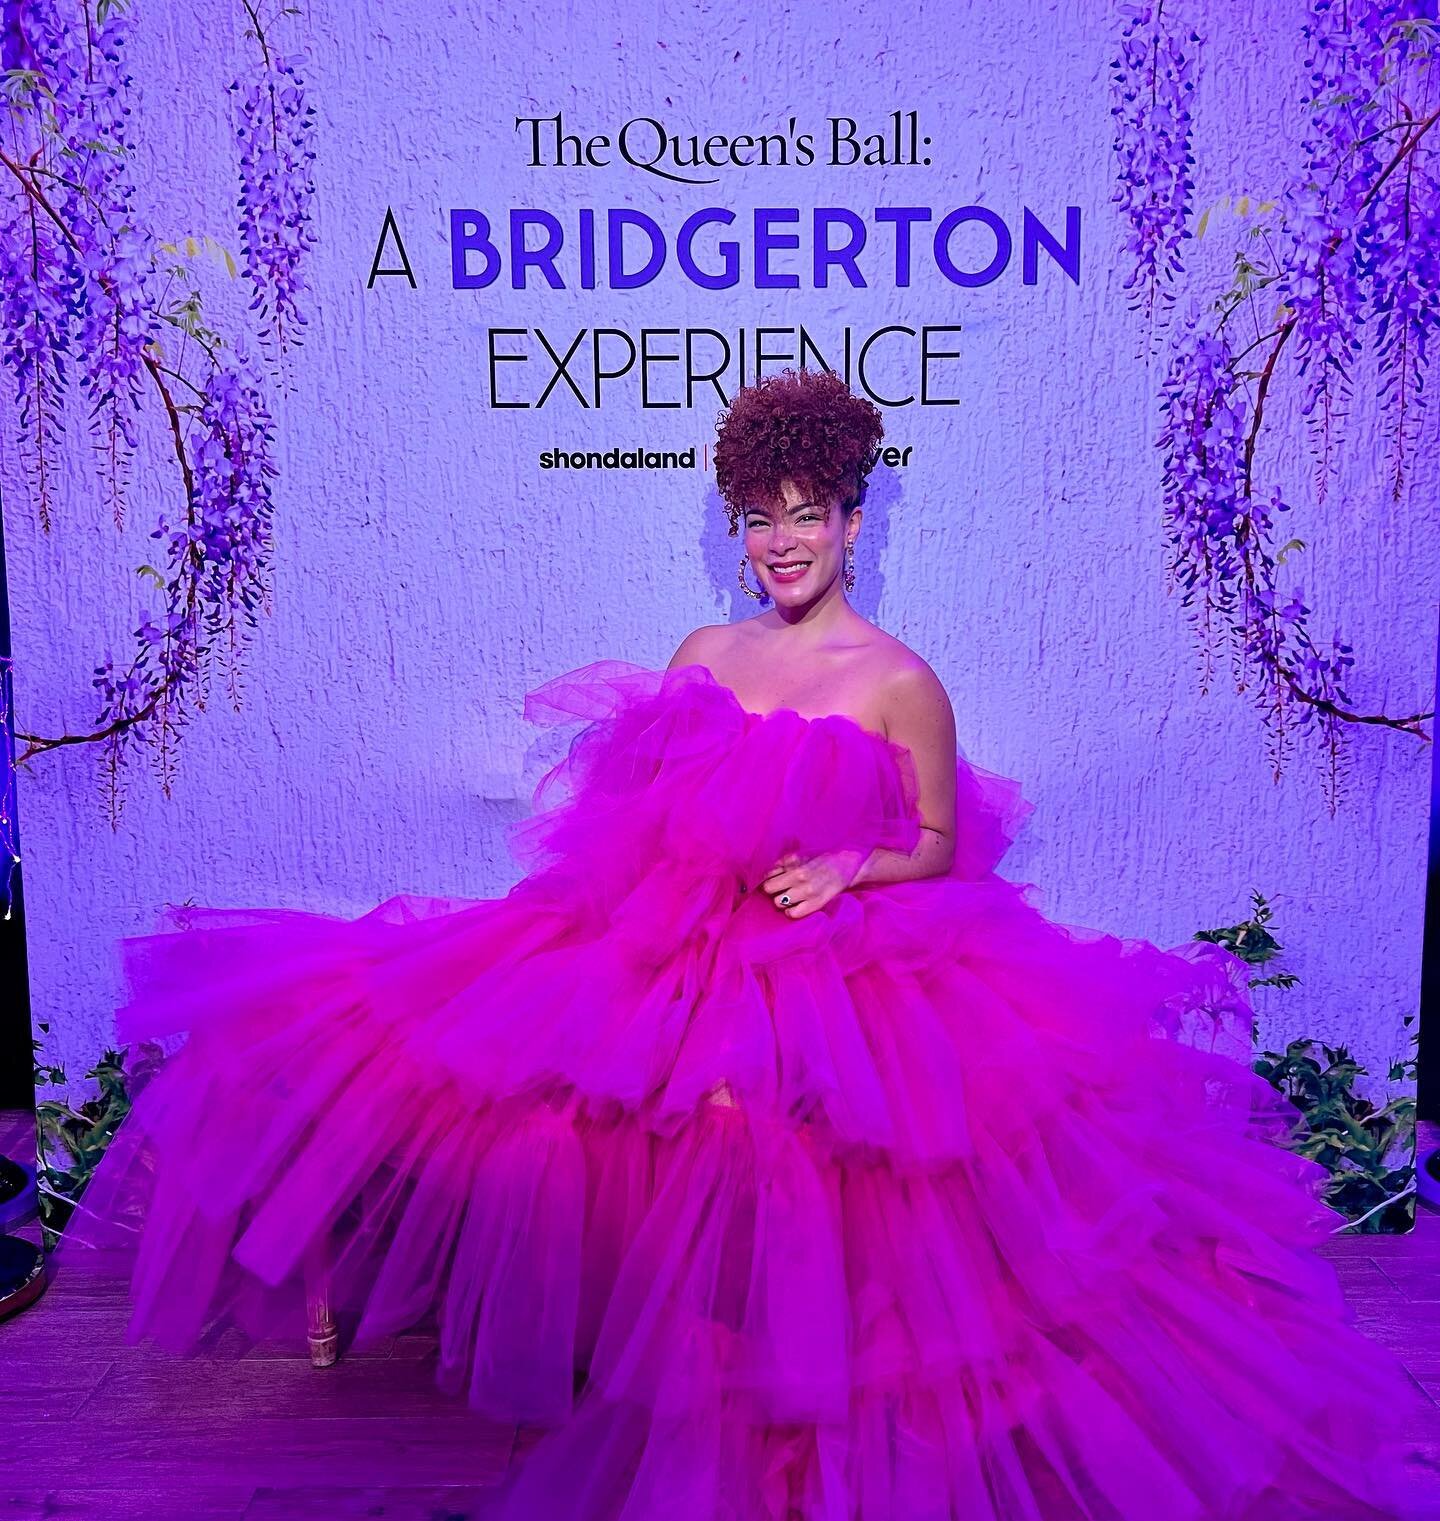 In her Diamond era 💎 but truly go experience @bridgertonexperience if you&rsquo;re in NYC! It&rsquo;s incredible, filled with surprises, a dance party, and more! ✨ 

*still cannot believe I was chosen by the Queen as the Diamond! 🥹

.
.
.
.
.
.
.
.